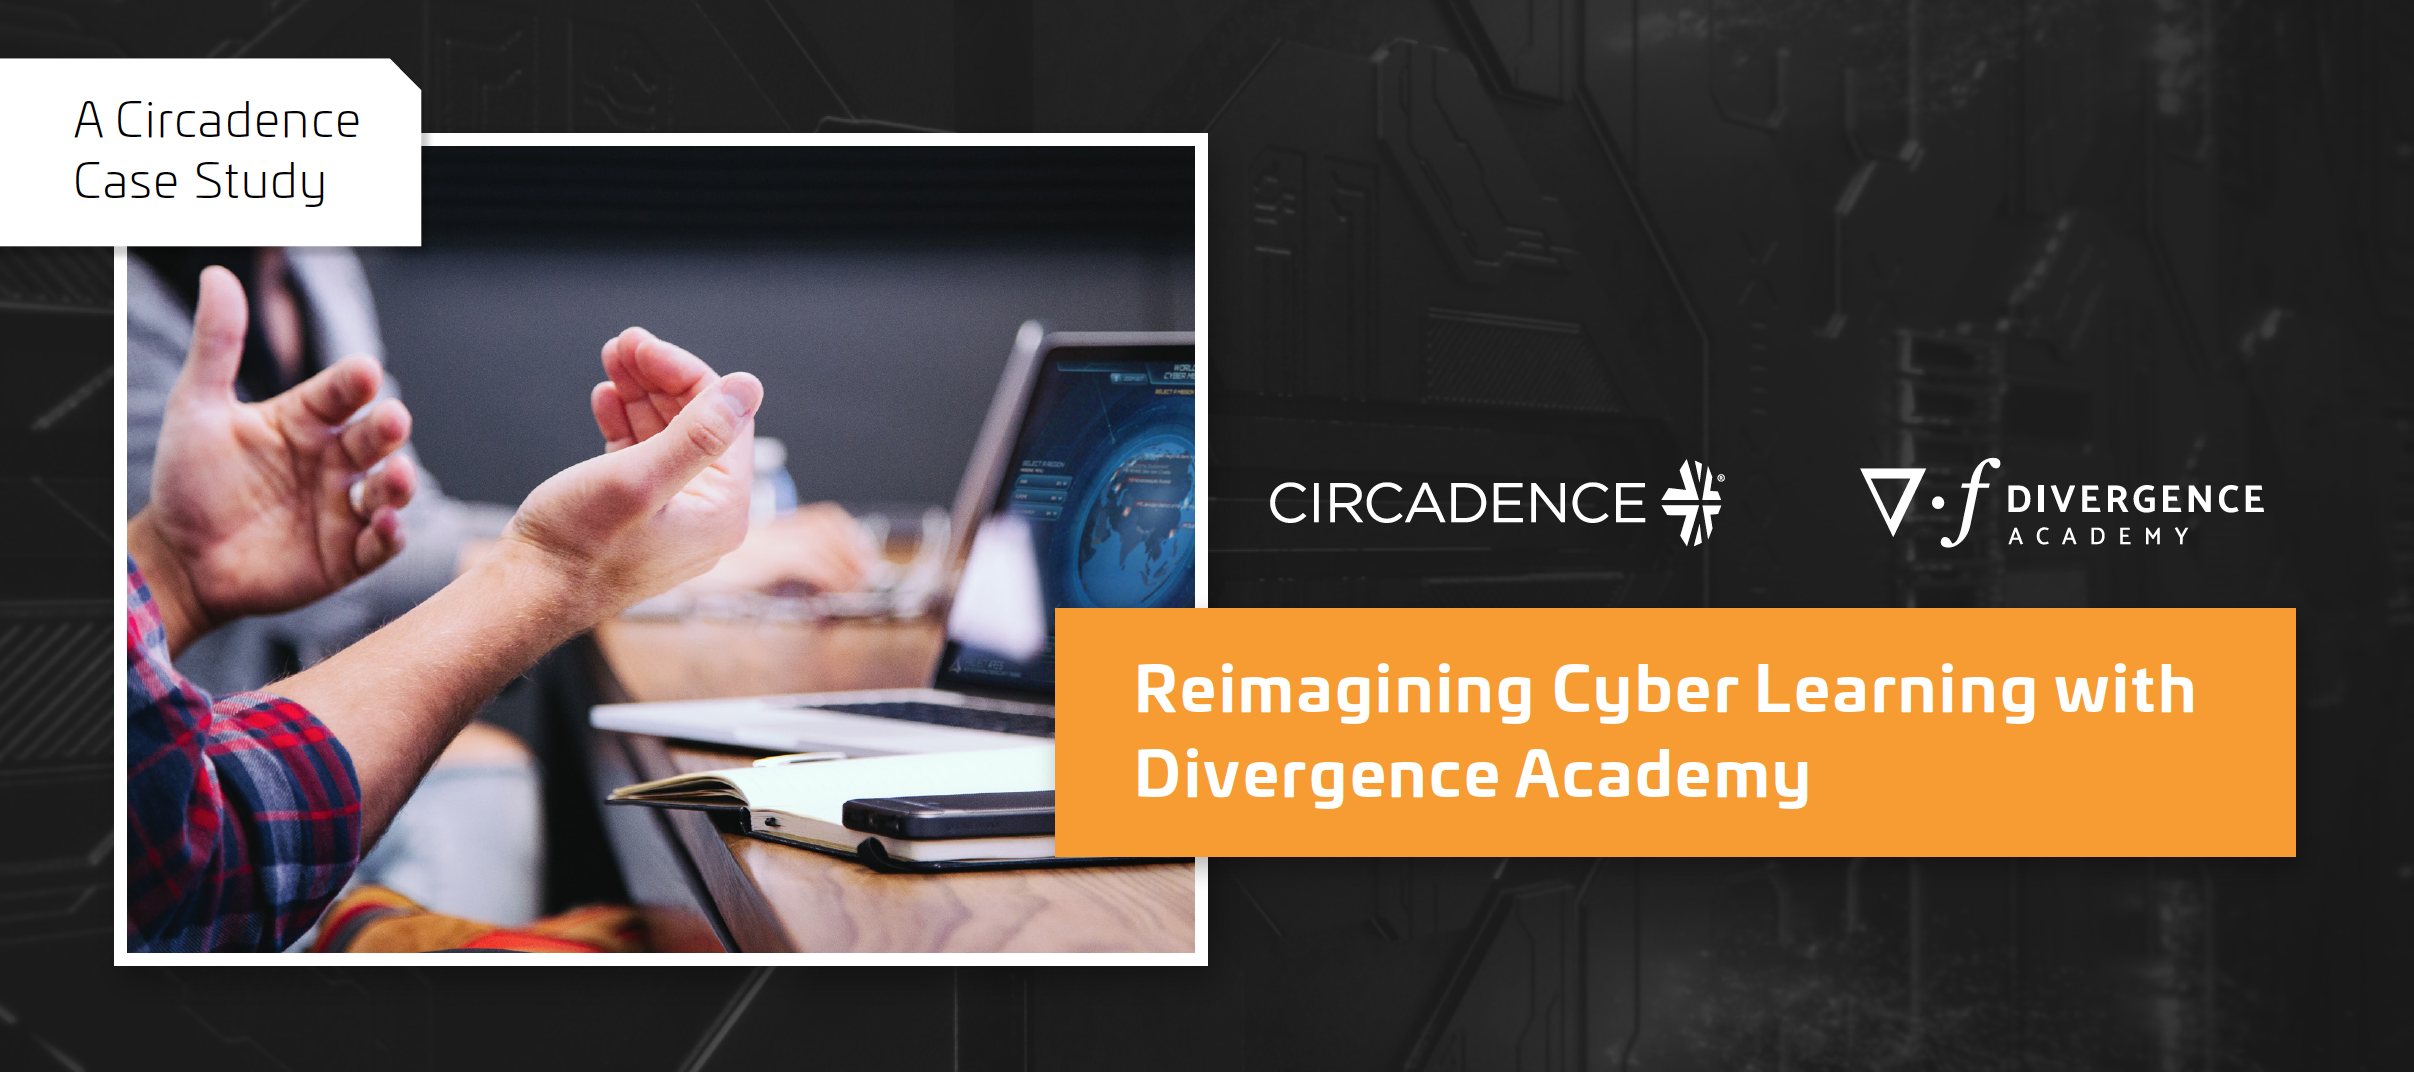 divergence academy success story